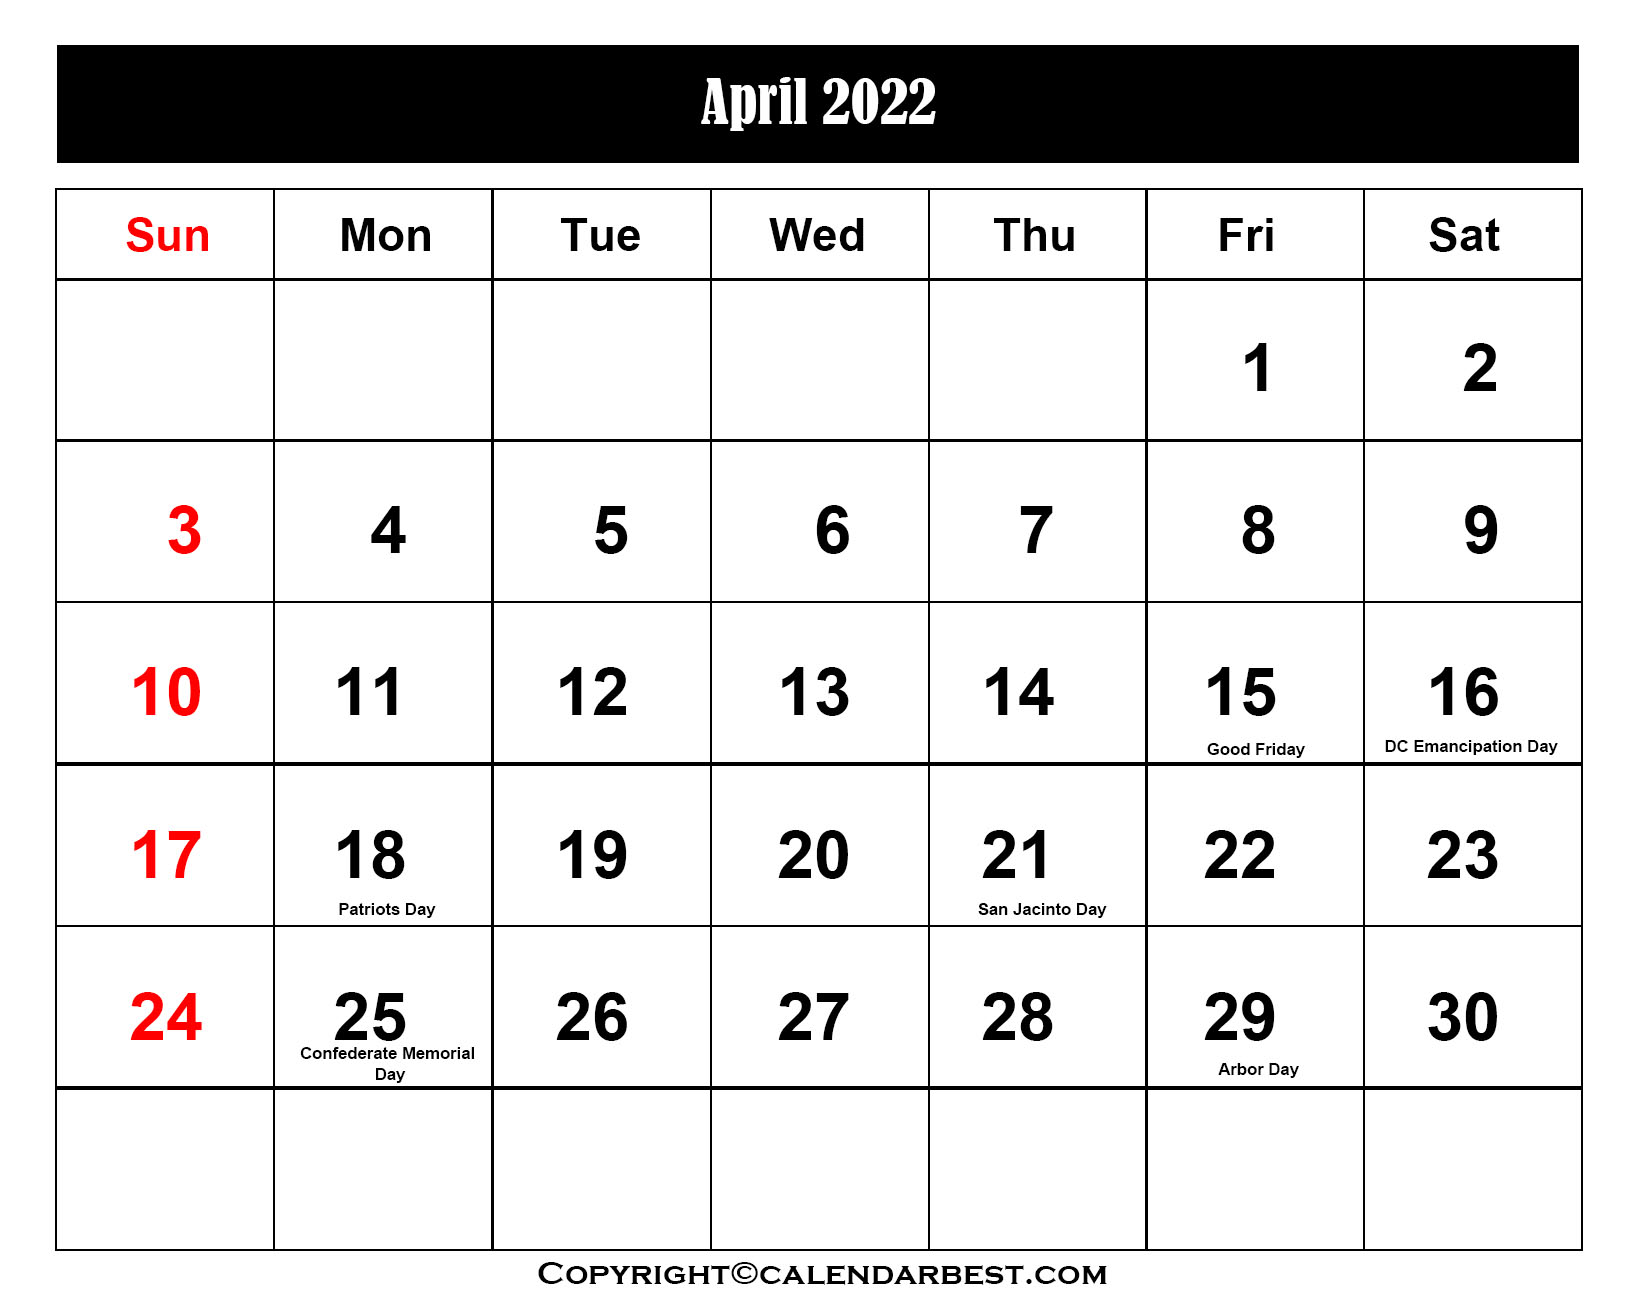 Free Printable April Calendar 2022 with Holidays in PDF